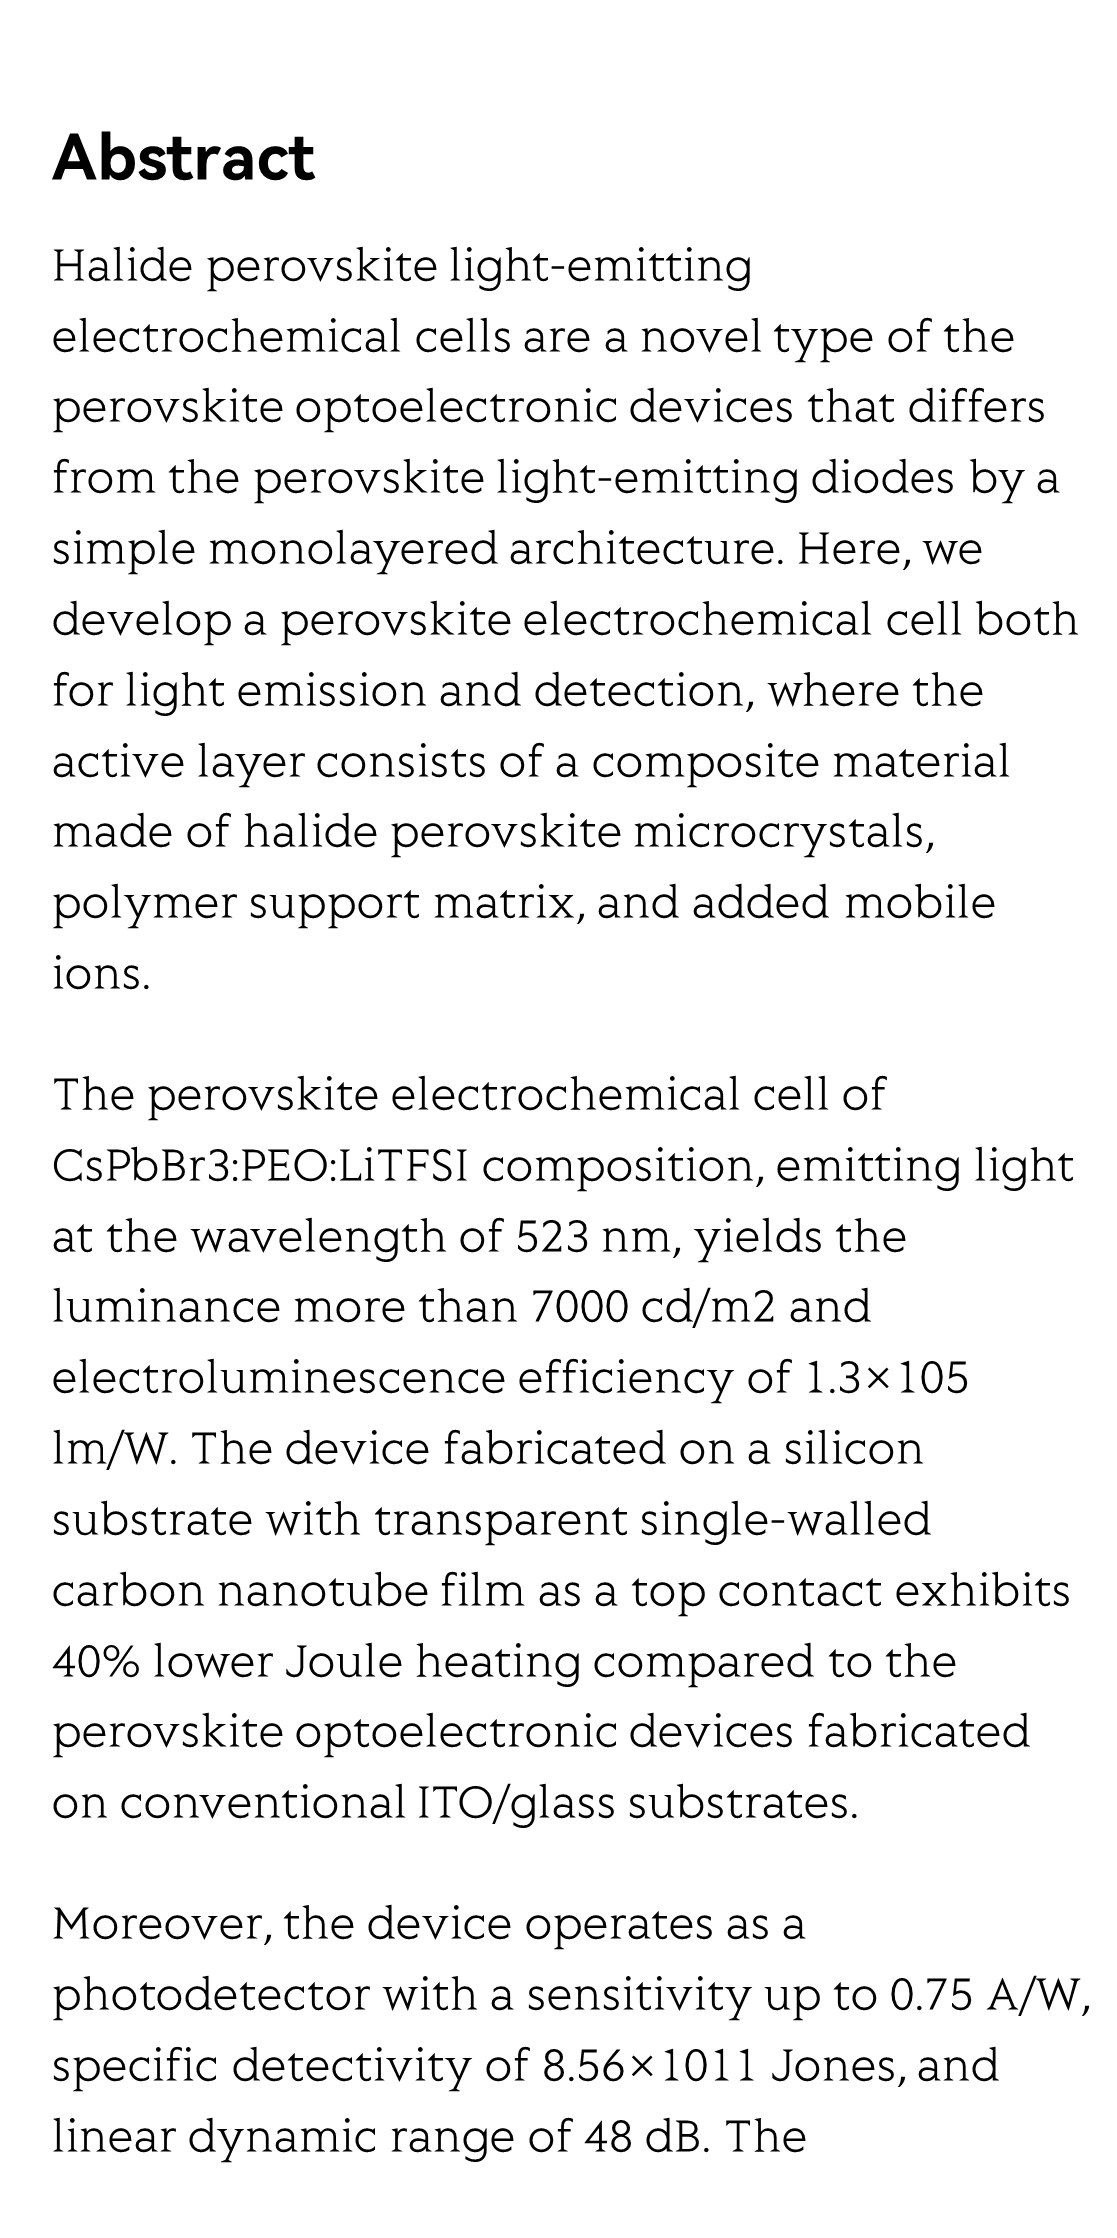 ITO-free silicon-integrated perovskite electrochemical cell for light-emission and light-detection_2